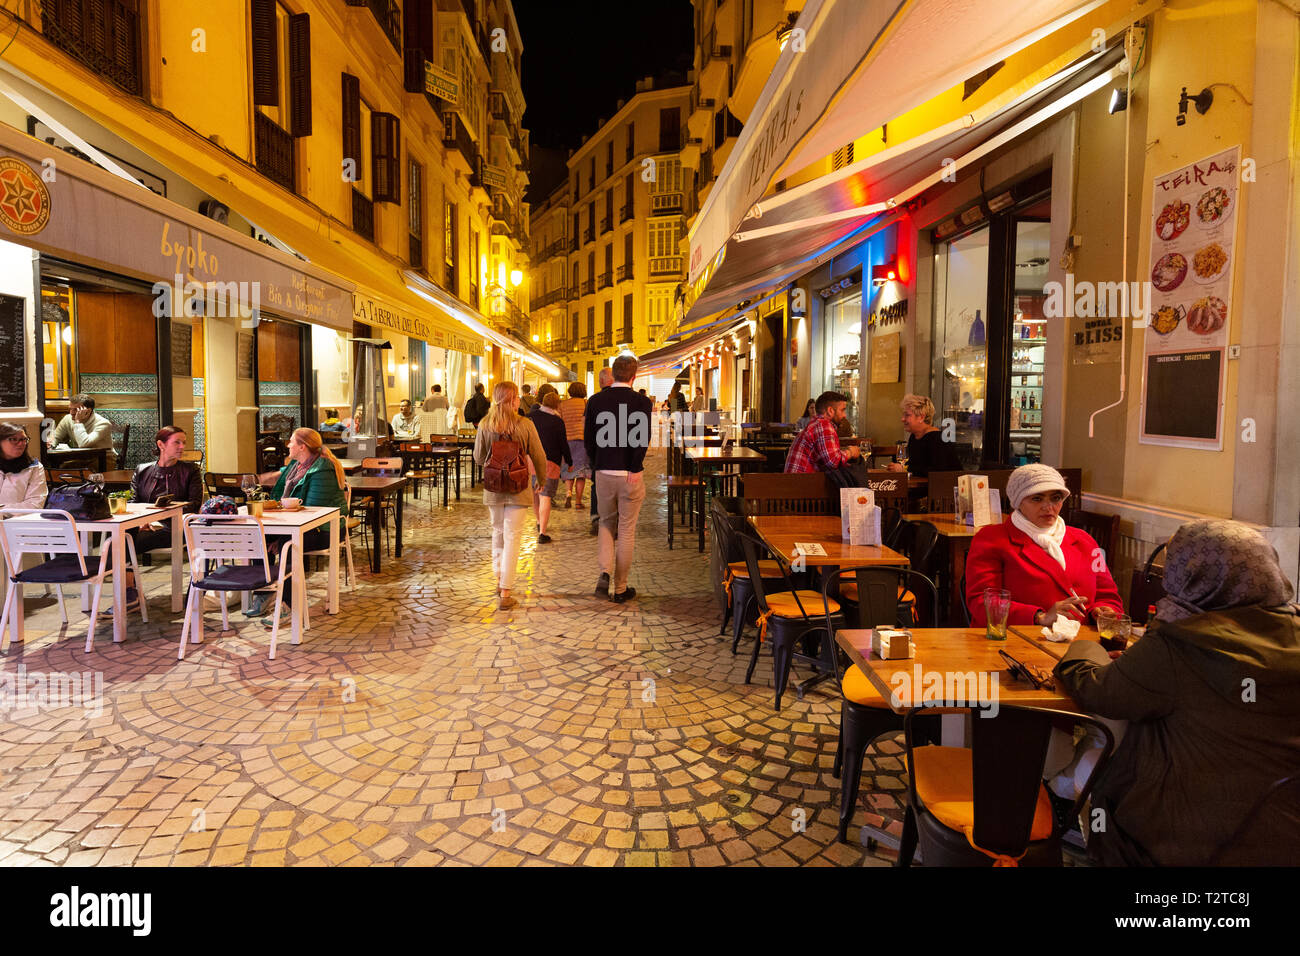 Malaga restaurants - Street with people sitting eating in restaurants cafes  and tapas bars at night, Malaga old town, Andalusia Spain Stock Photo -  Alamy